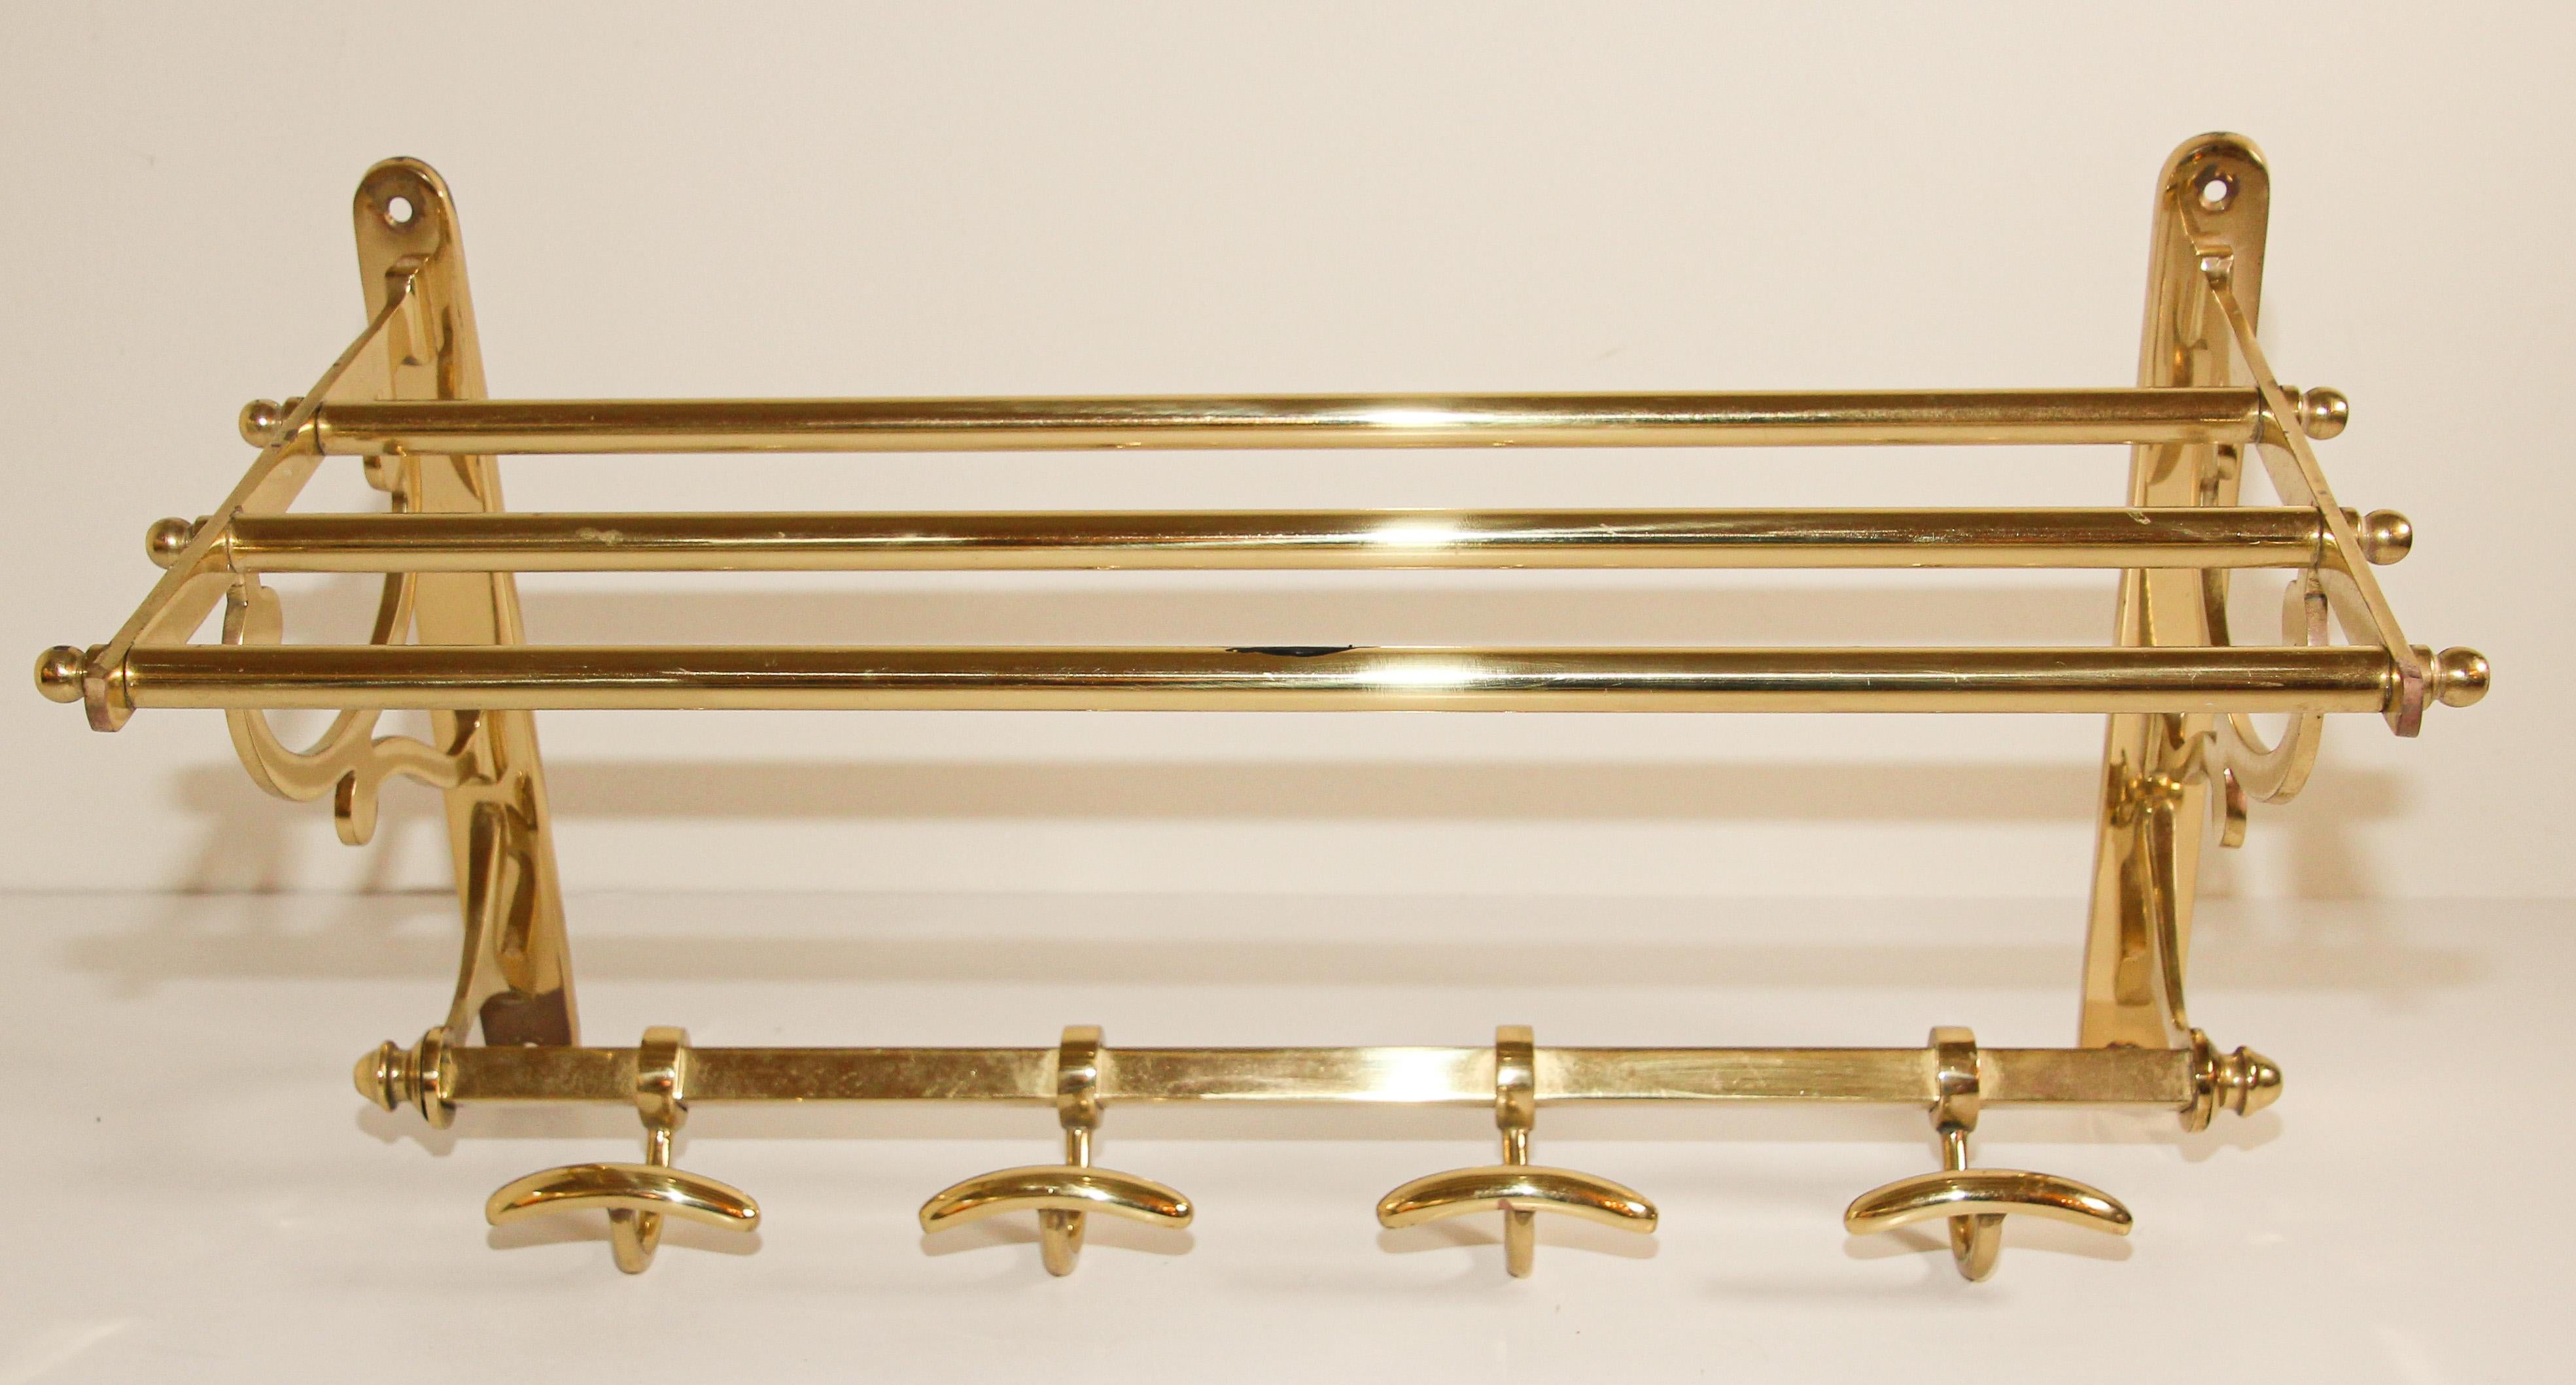 Brass coat rack with shelf and four hooks
Vintage brass coat rack, 1960s
Stunning and exceptional modernist coat rack or wall wardrobe. 
This great piece is functional and highly collectable, it would perfectly fit in any design interior.
A